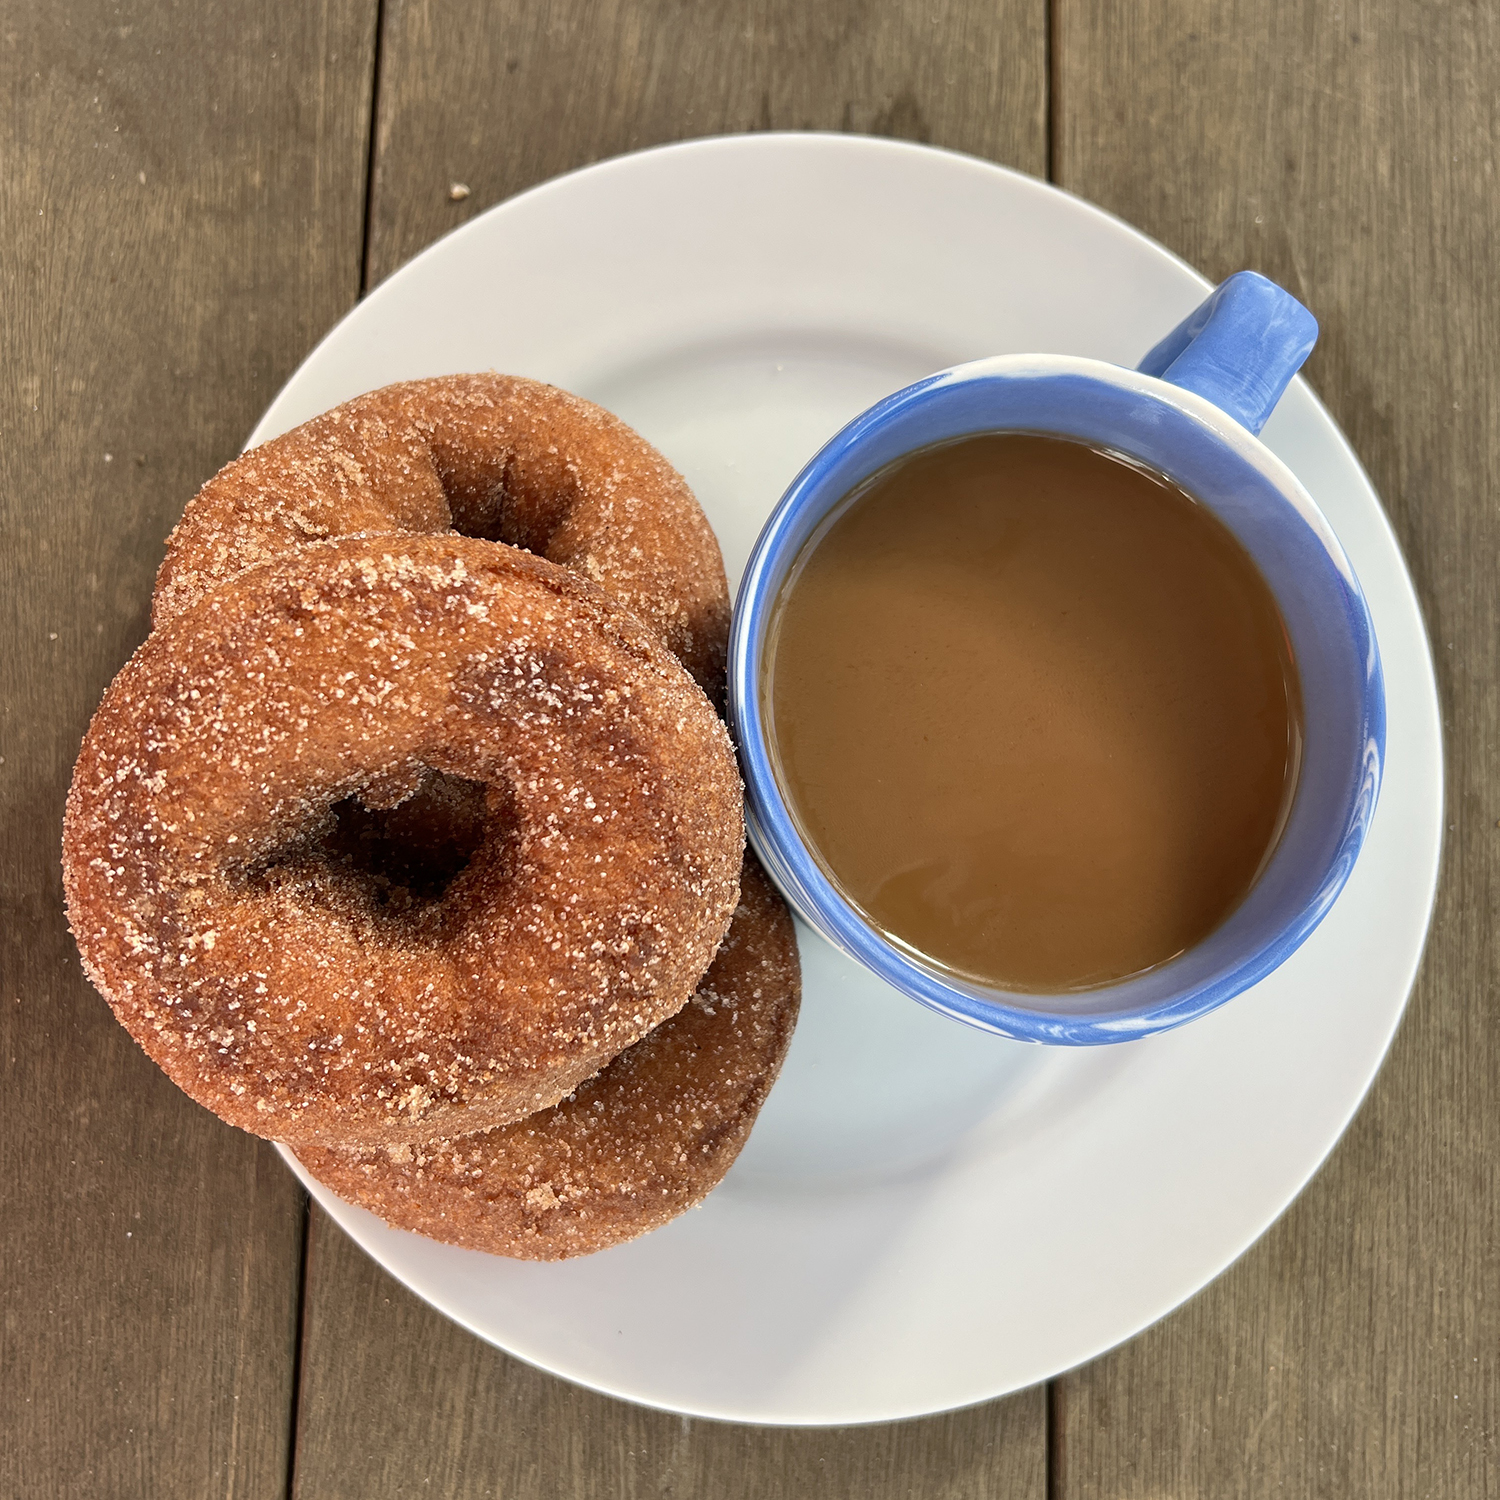 An above view of a ceramic plate with three apple cider doughnuts and a mug full of coffee